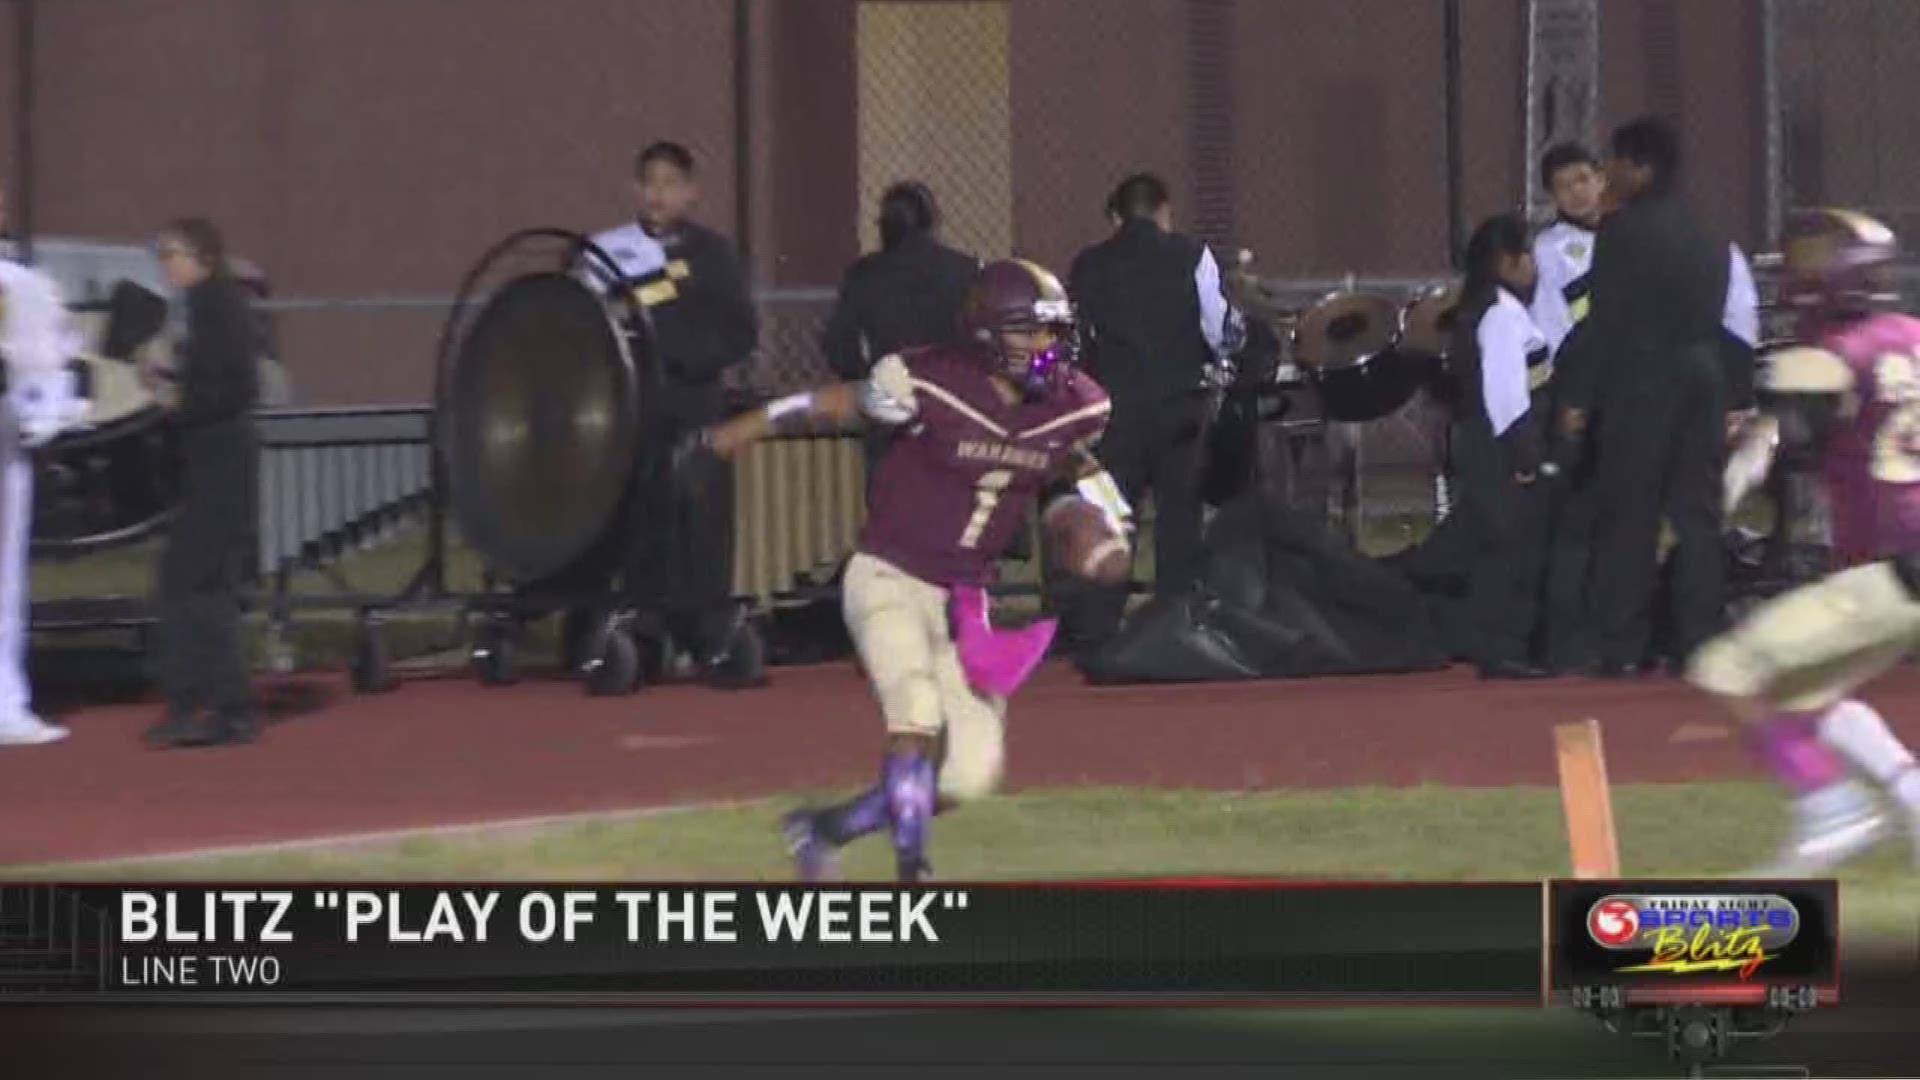 Blitz Week 8 - Part IV
- Tuloso-Midway's Noah Barrientez crowned our Week 7 Play of the Week
- Plus, a look towards the weekend's games and next week on the Blitz..